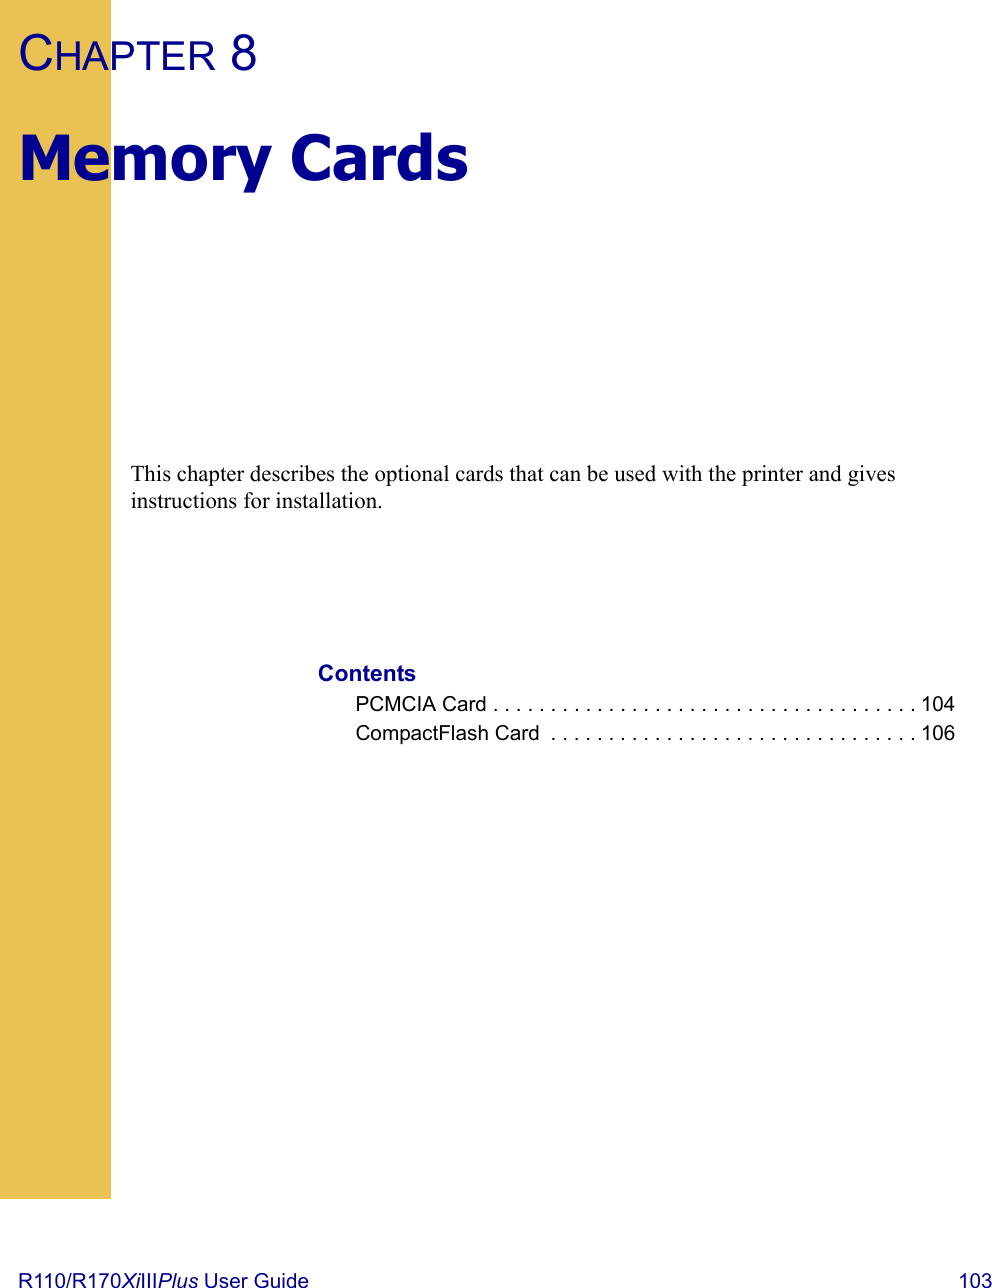 R110/R170XiIIIPlus User Guide  103CHAPTER 8Memory CardsThis chapter describes the optional cards that can be used with the printer and gives instructions for installation.ContentsPCMCIA Card . . . . . . . . . . . . . . . . . . . . . . . . . . . . . . . . . . . . . 104CompactFlash Card  . . . . . . . . . . . . . . . . . . . . . . . . . . . . . . . . 106